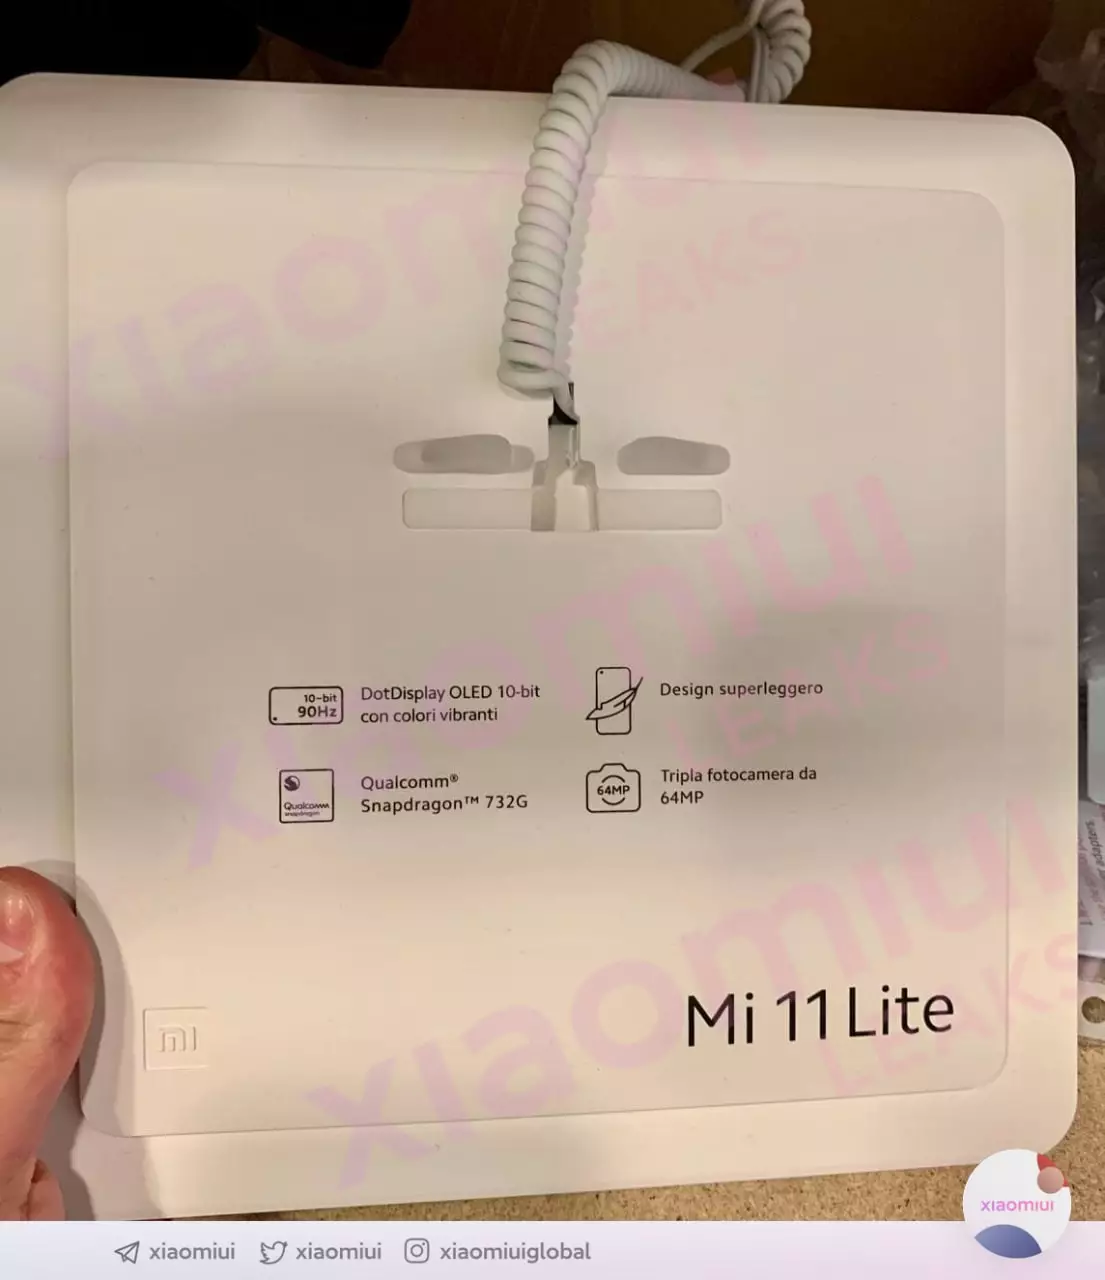 Xiaomi Mi 11 Lite specifications tipped ahead of launch, may come with 4G